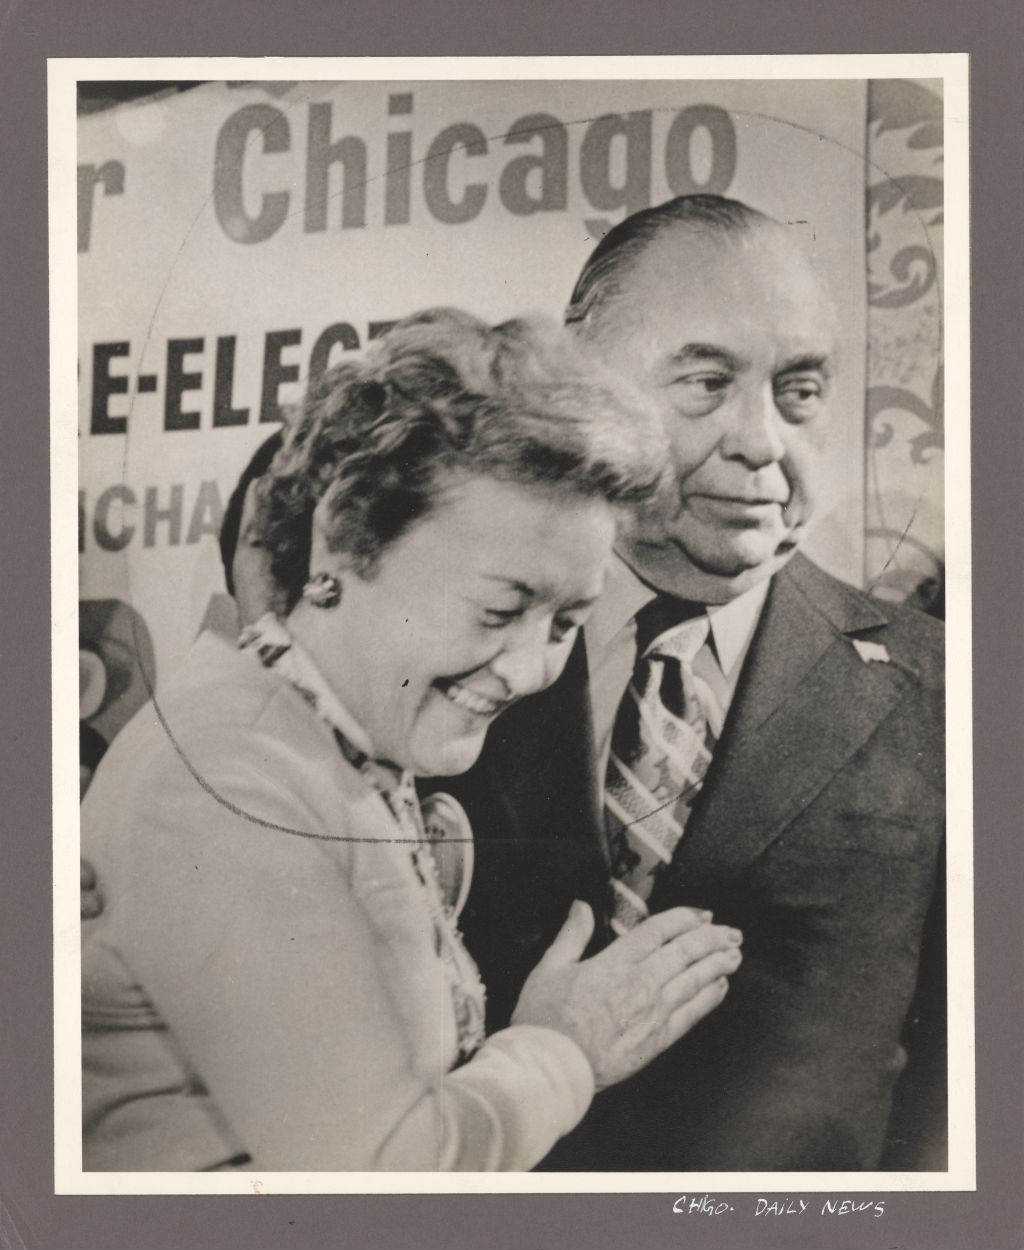 Eleanor and Richard J. Daley on mayoral primary election night